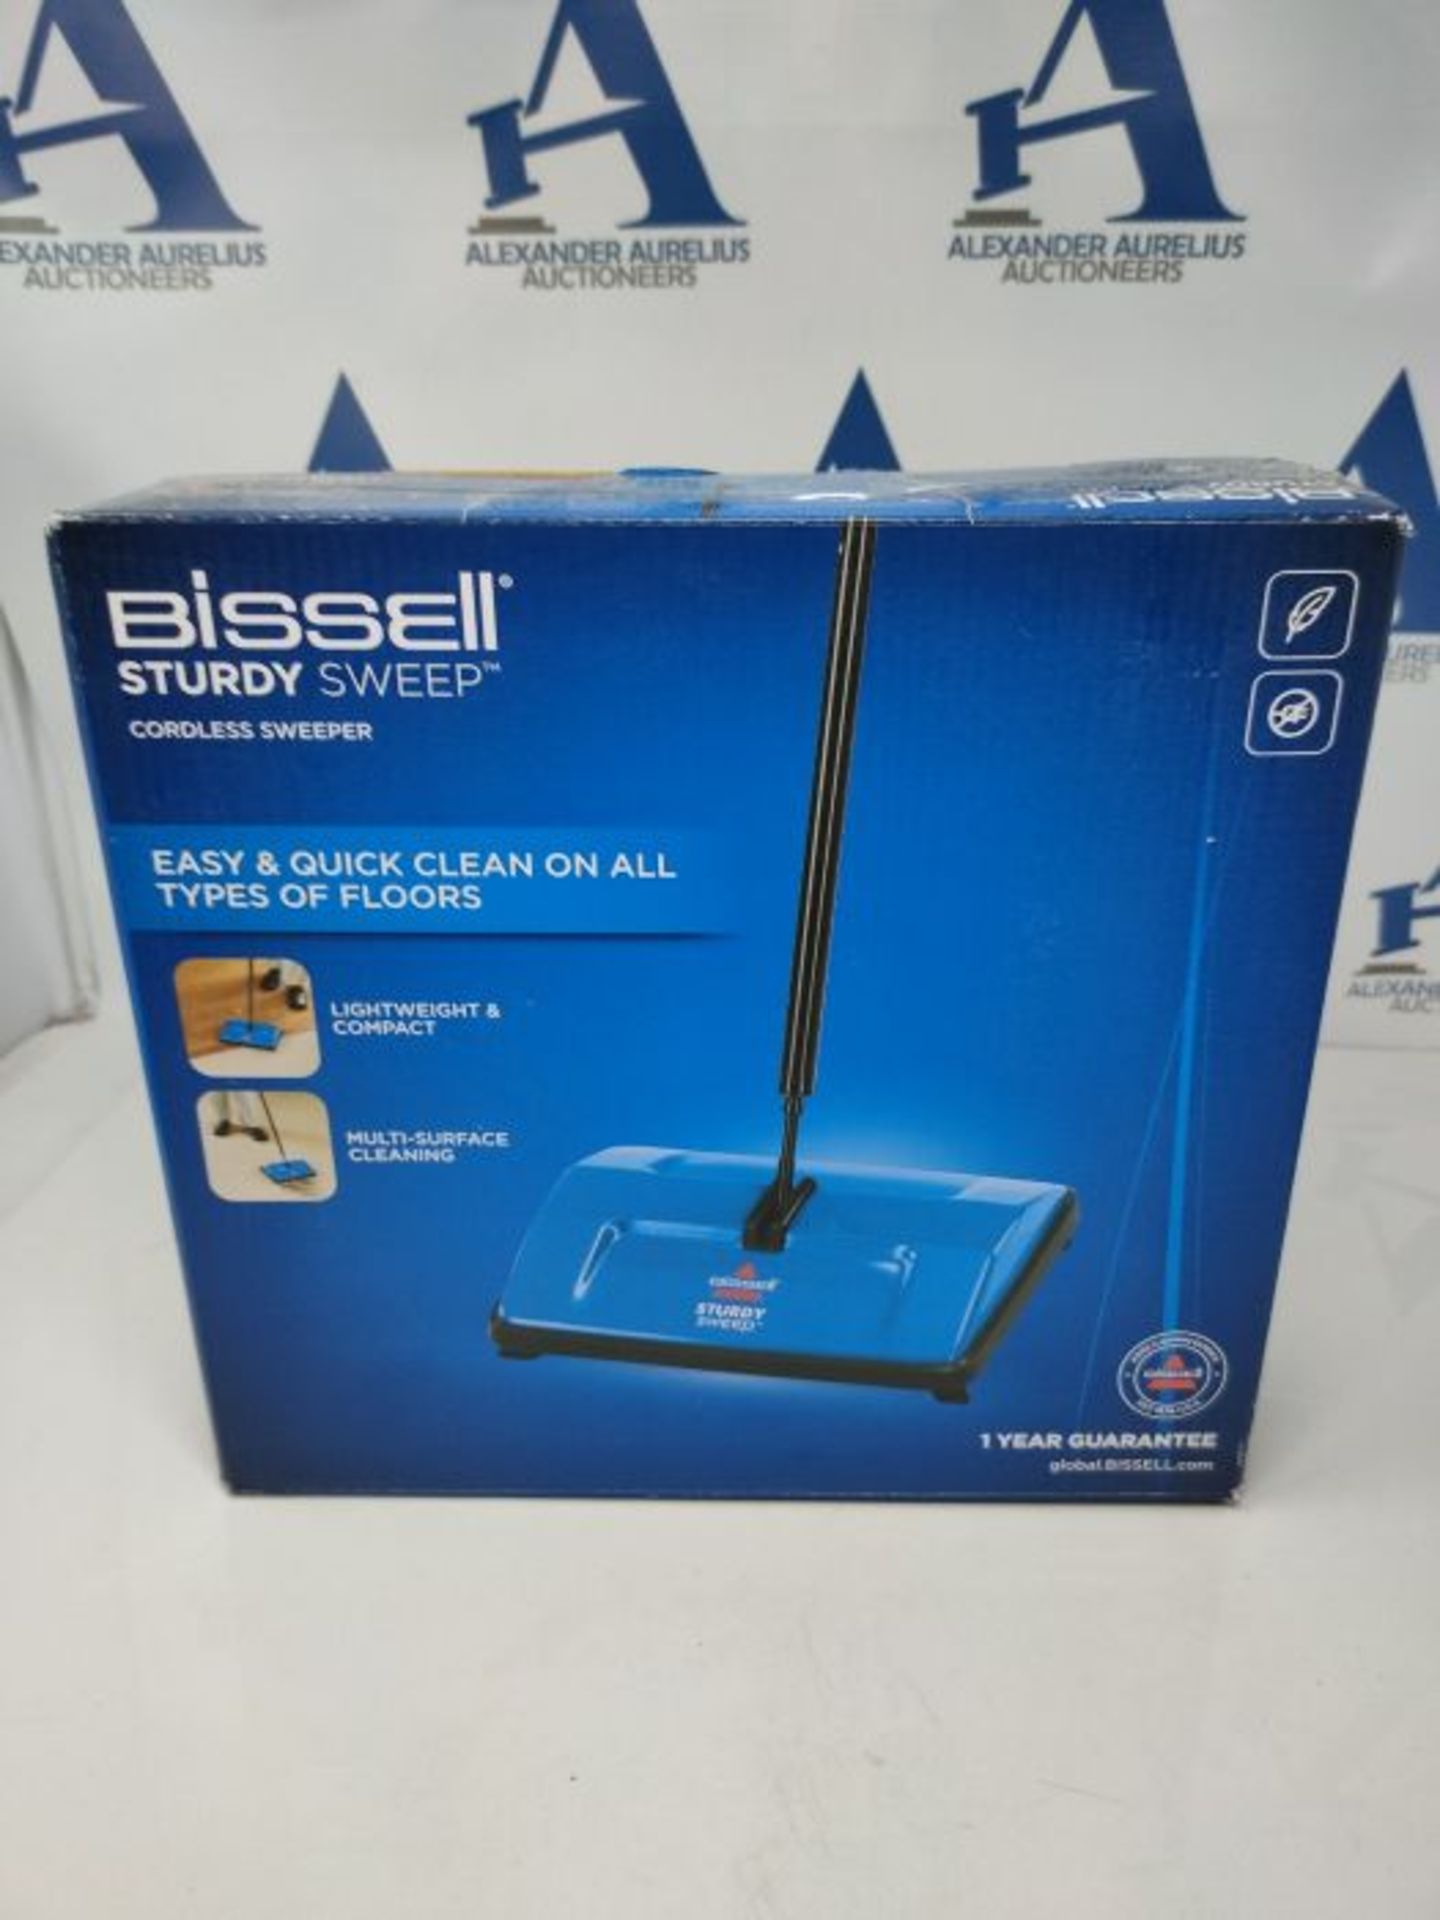 BISSELL Sturdy Sweep | Lightweight Carpet Sweeper | 2402E, Blue - Image 2 of 3